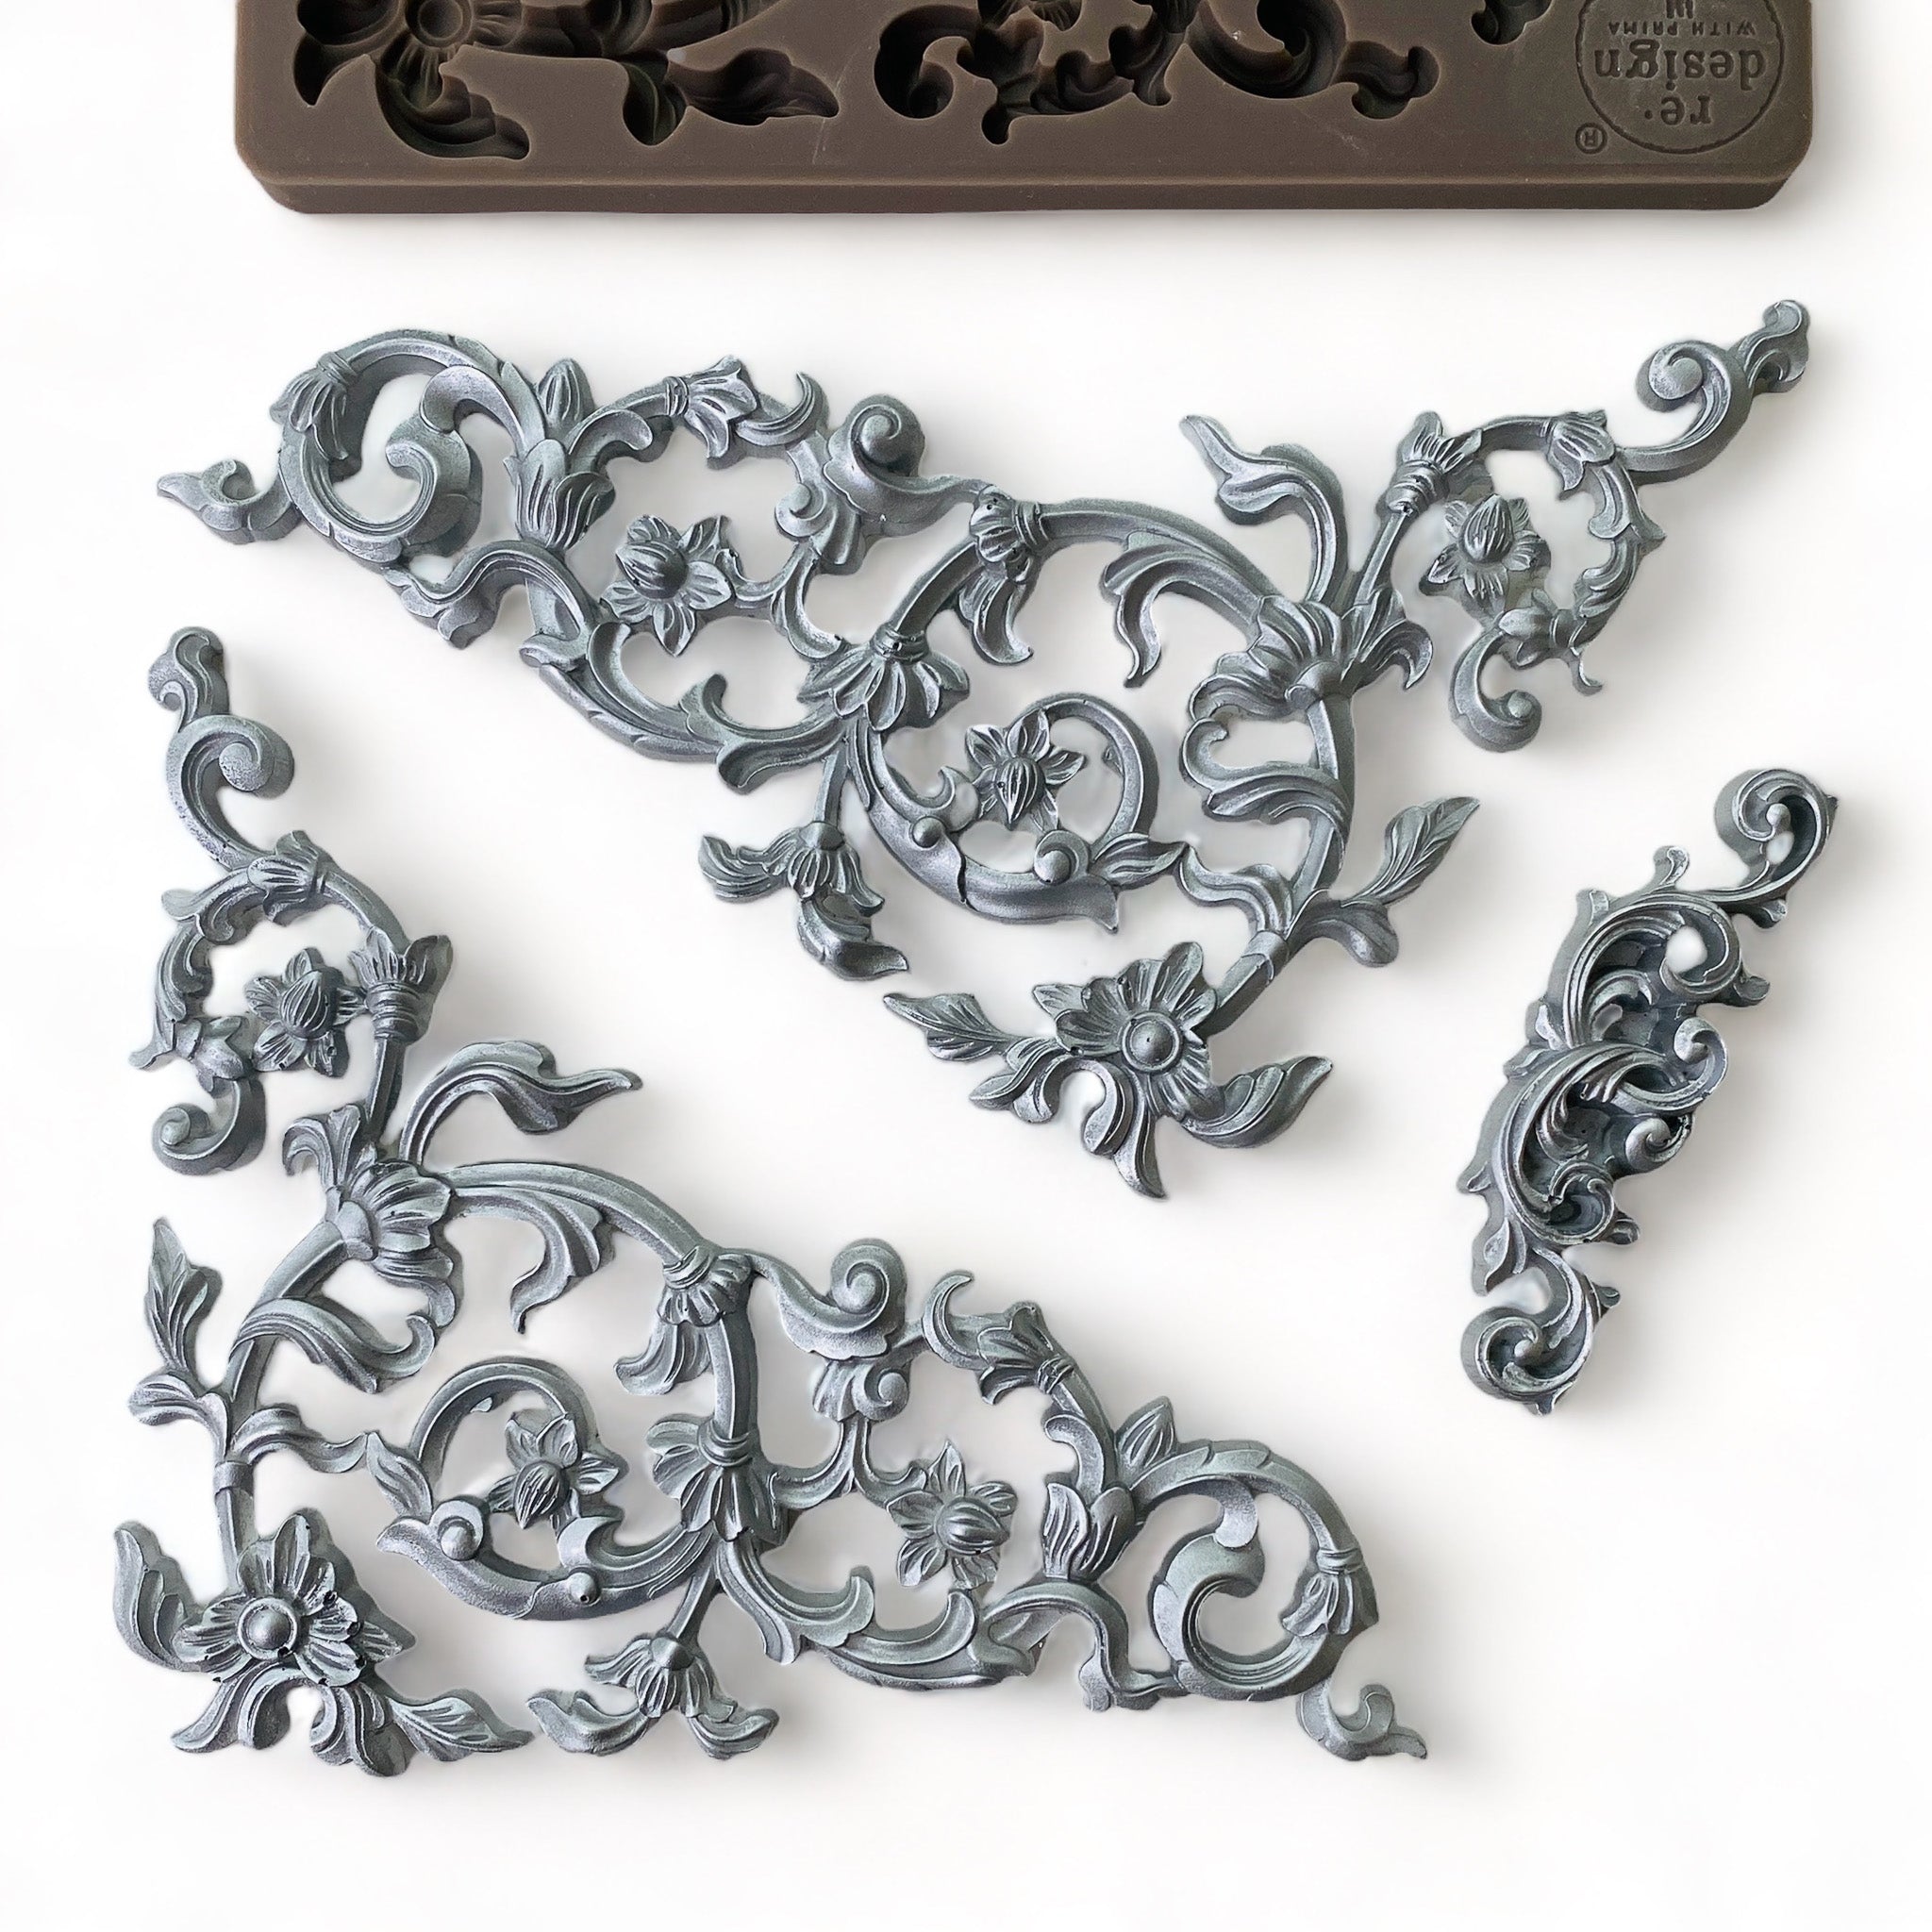 A brown silicone mold and silver-colored castings that feature 2 scrolling vine corners and a small center accent scroll are against a white background.